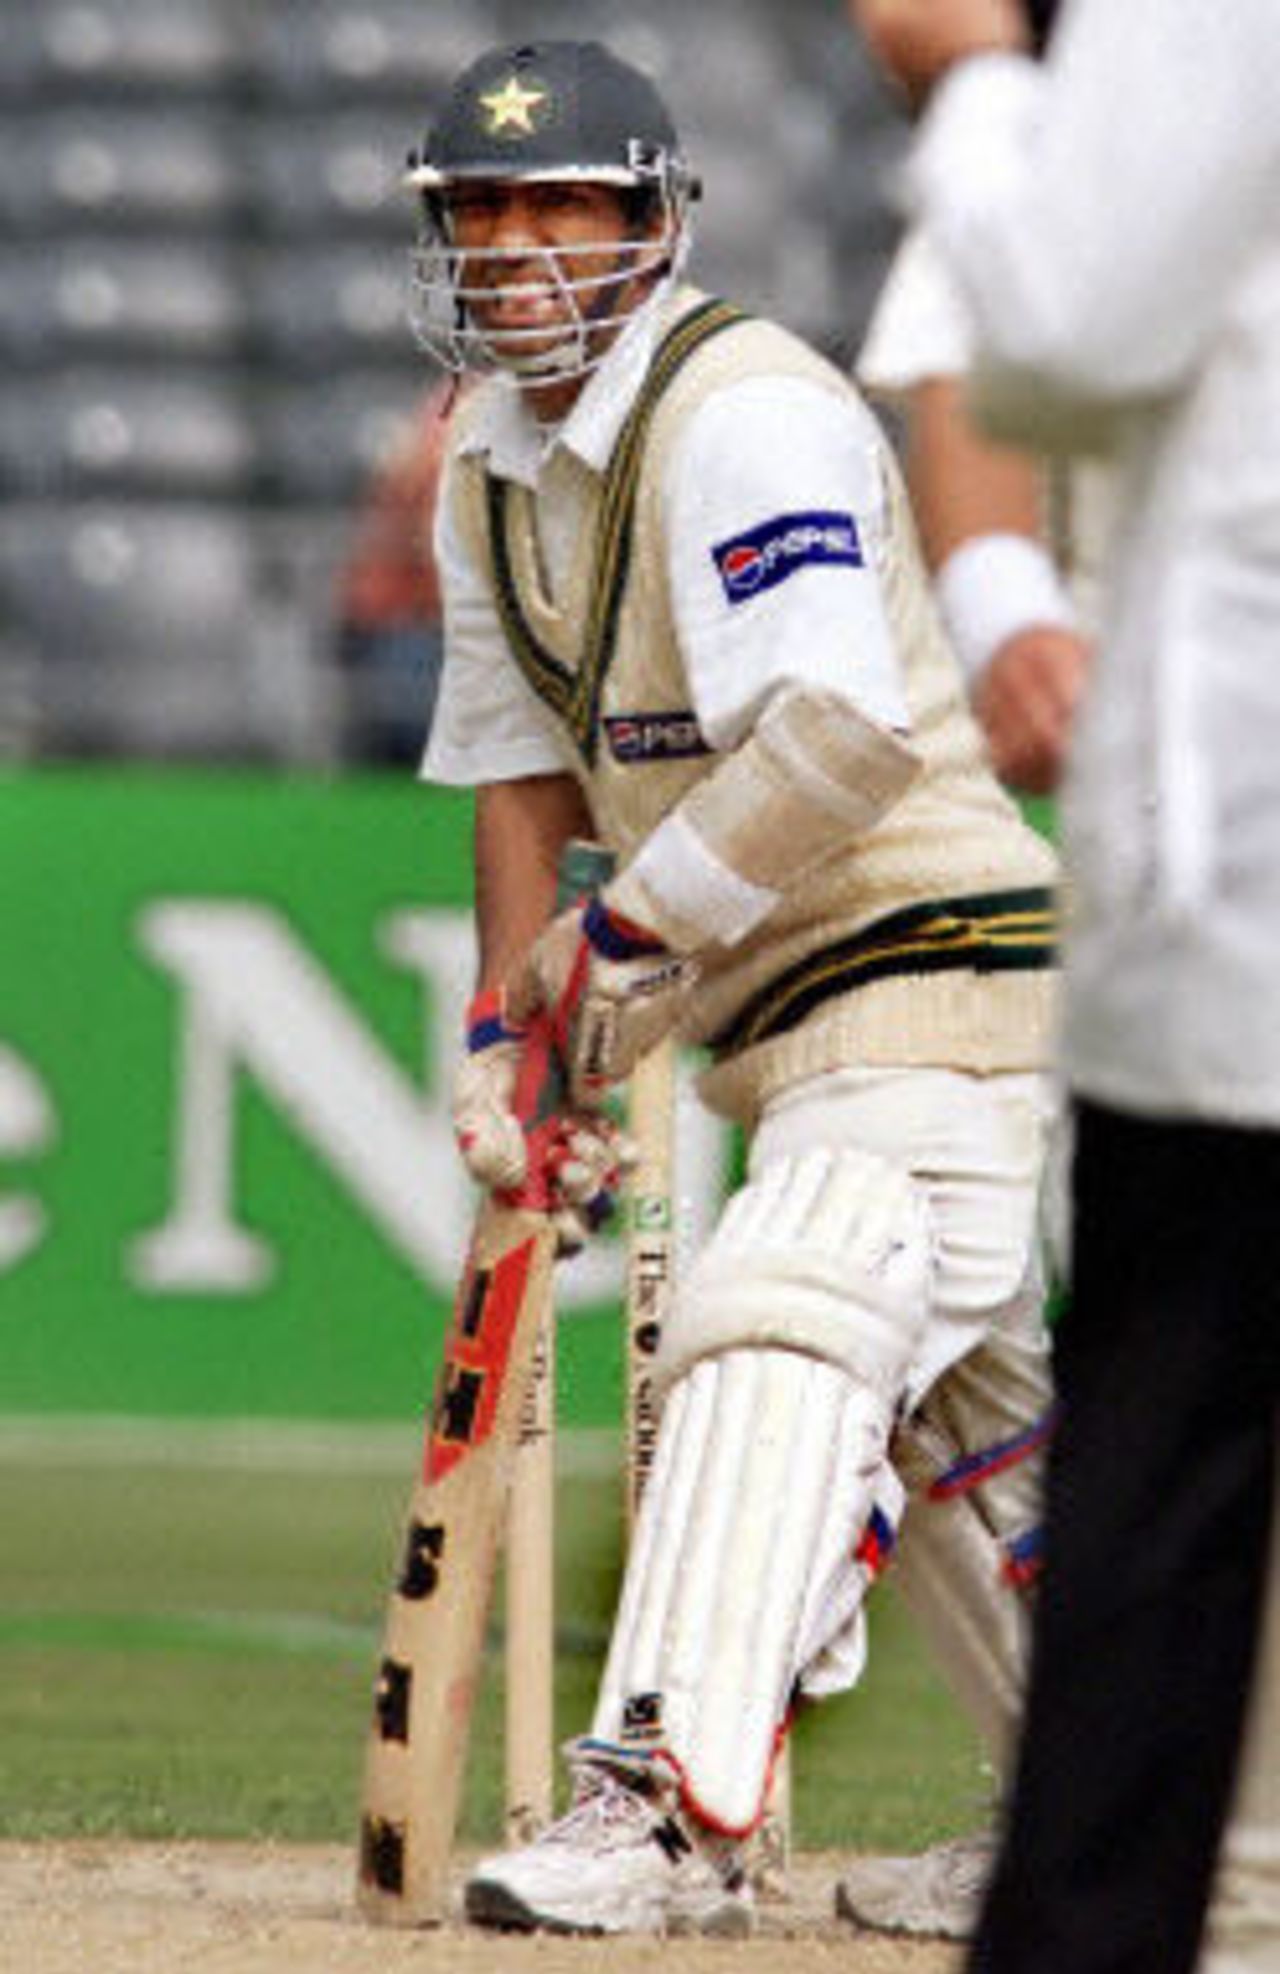 Yousuf Youhana pokes out his tongue after missing a ball on the way to scoring a double century, day 4, 2nd Test at Christchurch, 15-19 March 2001.